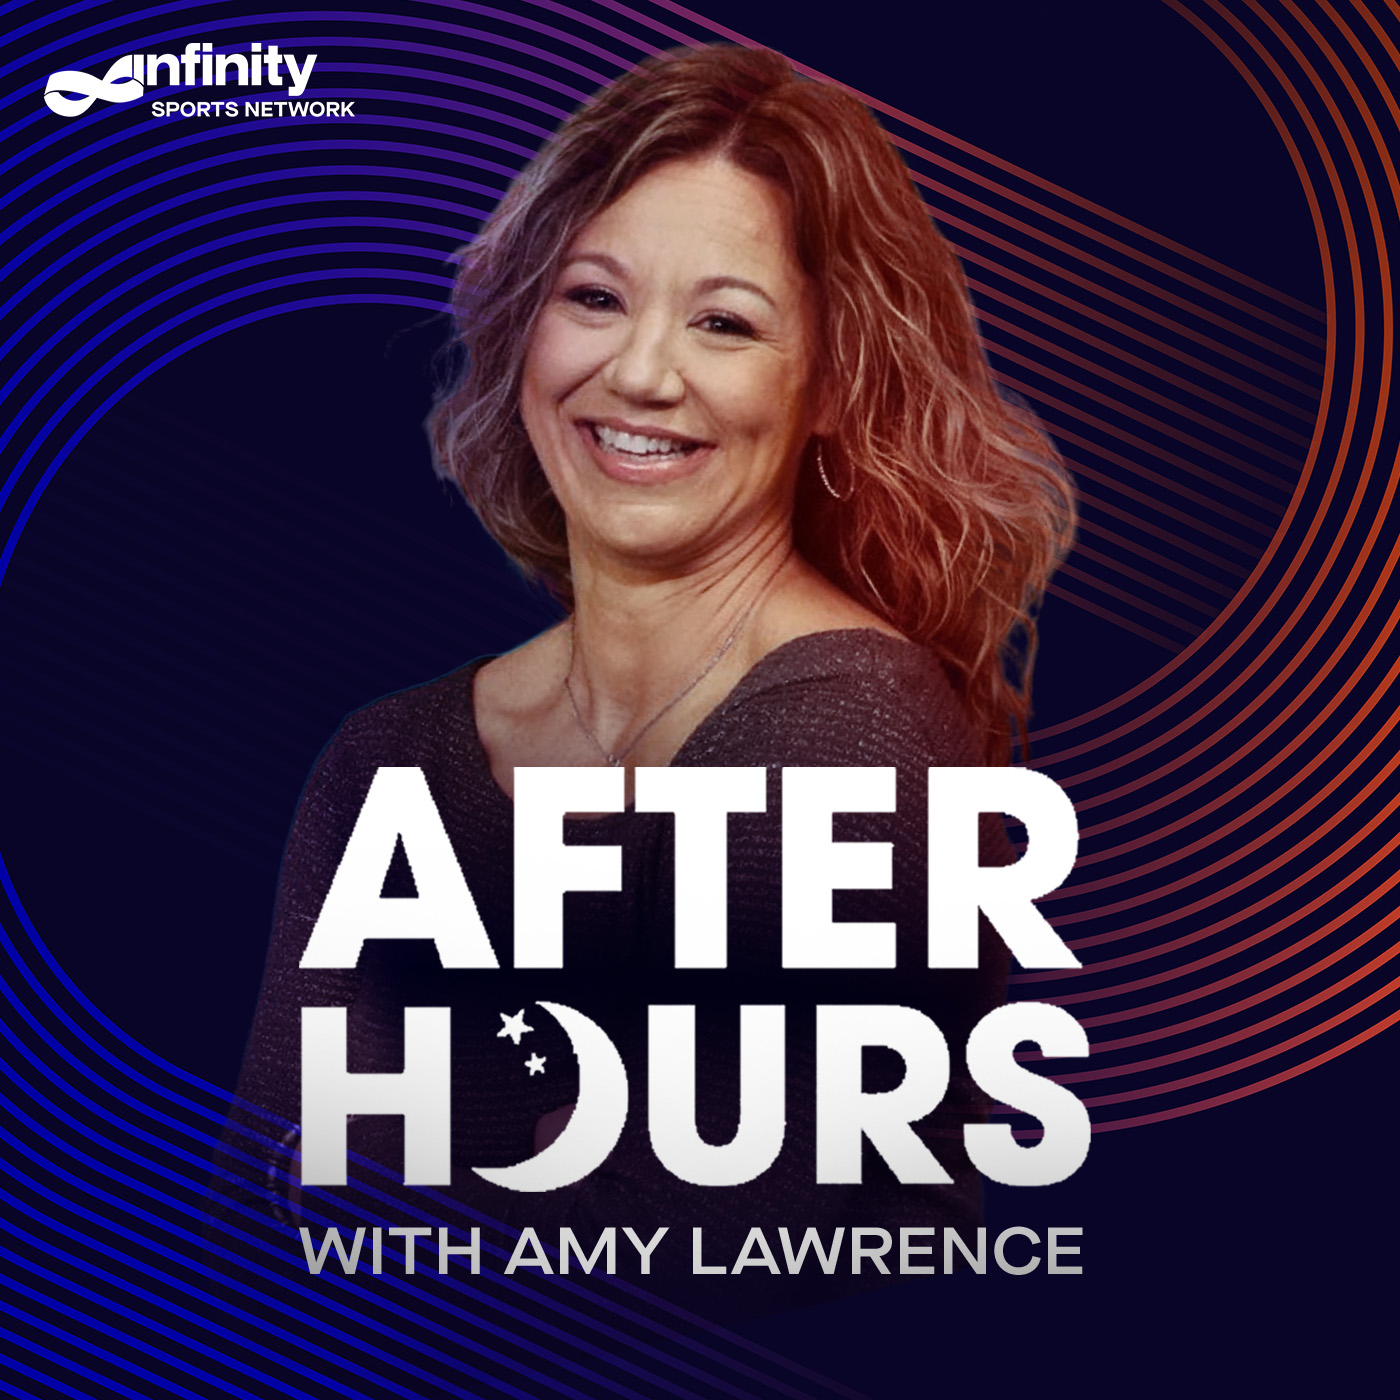 2/8/21 After Hours with Lawrence PODCAST: Hour 4